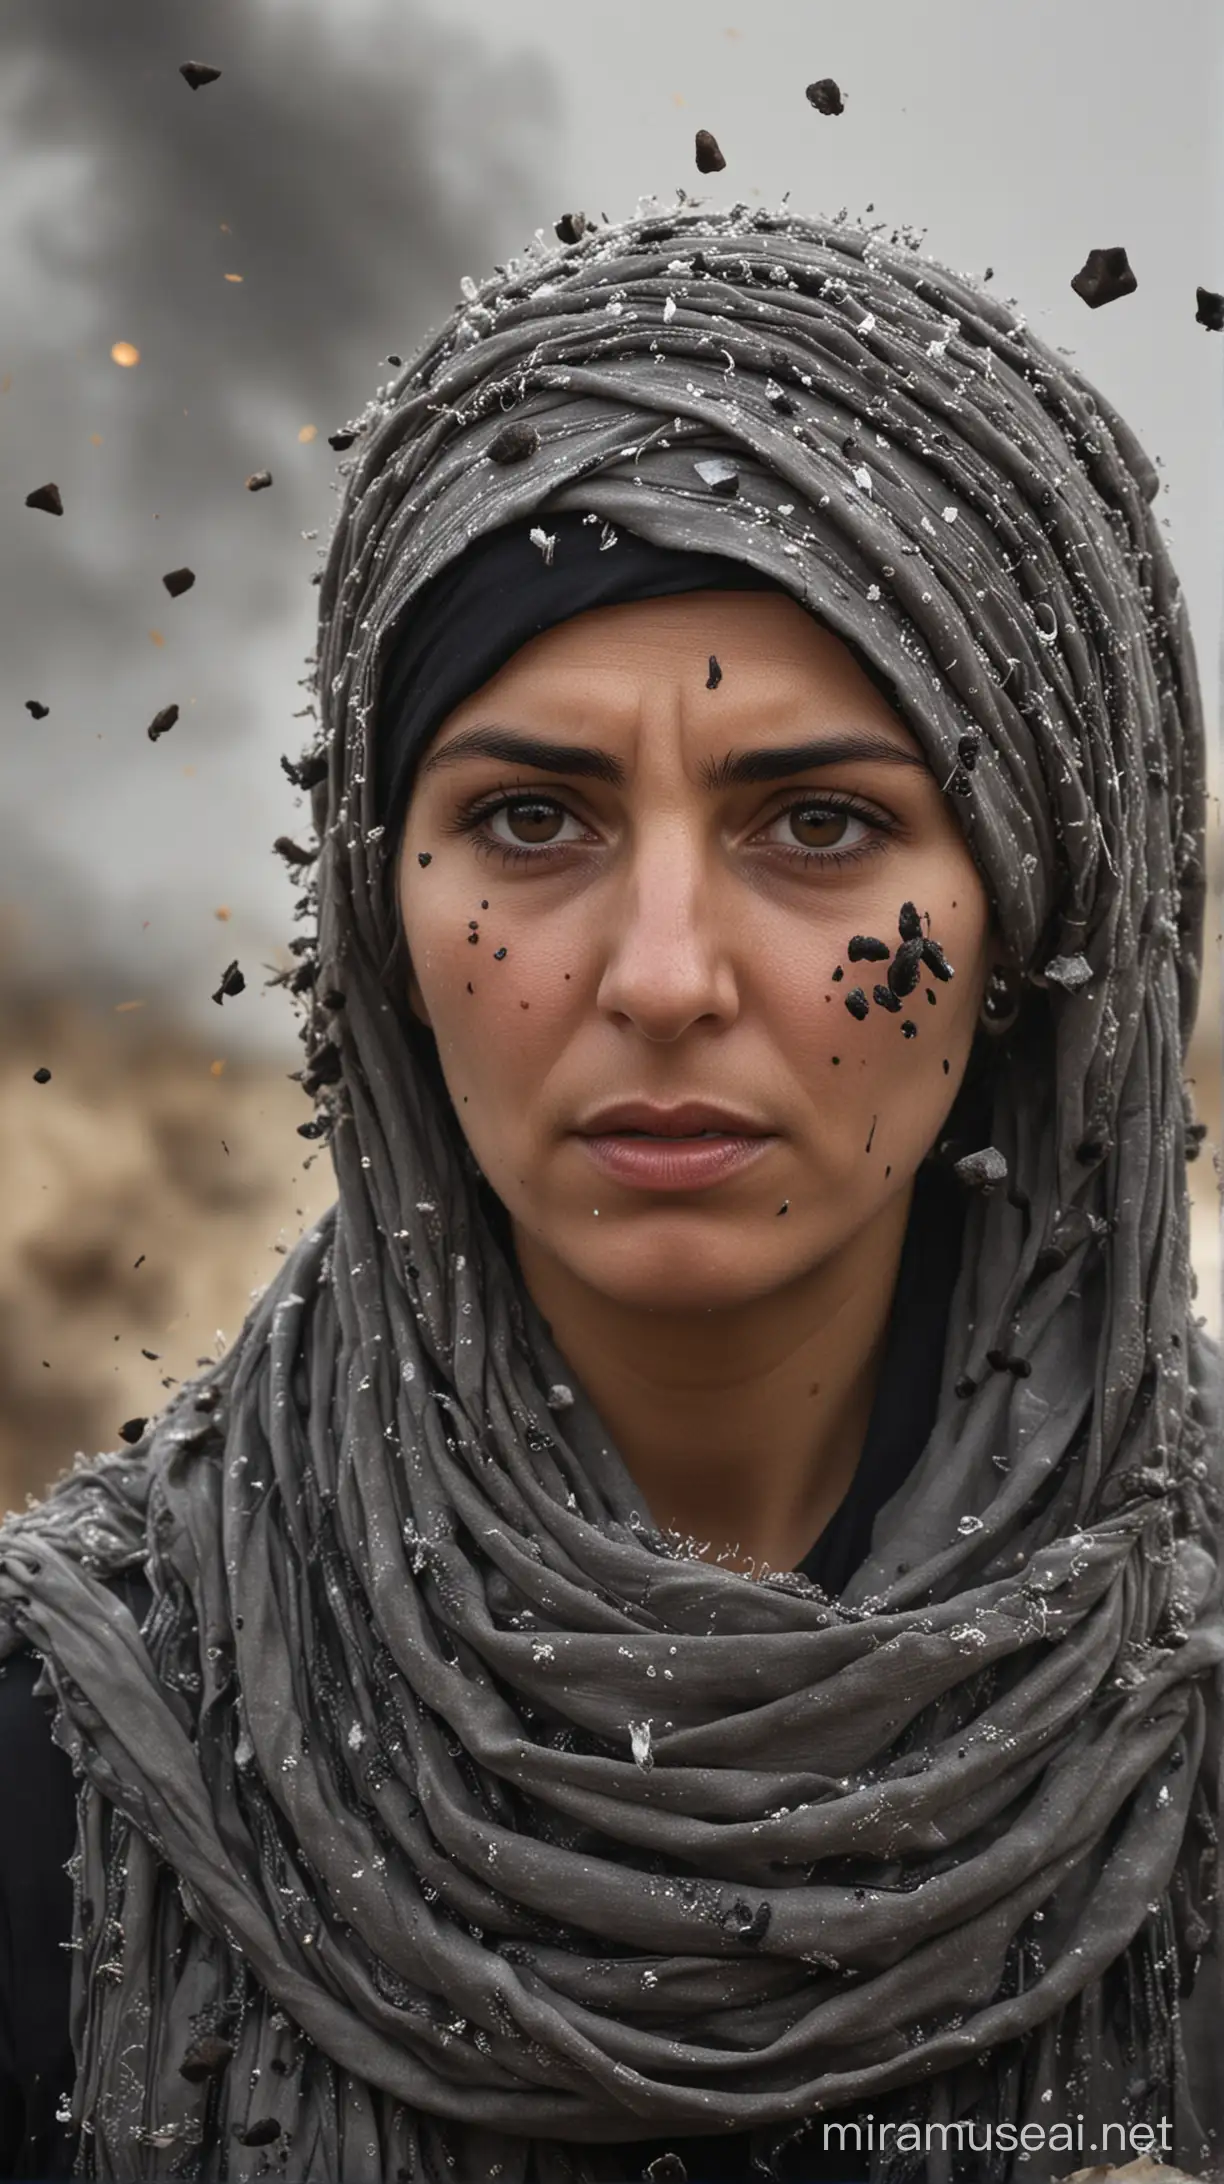 As shrapnel explodes in the sky, scattering debris around, Mücahide Hatice Hanım bravely advances, facing the challenges of war with a steadfast gaze. Her hair is covered with a turban.

